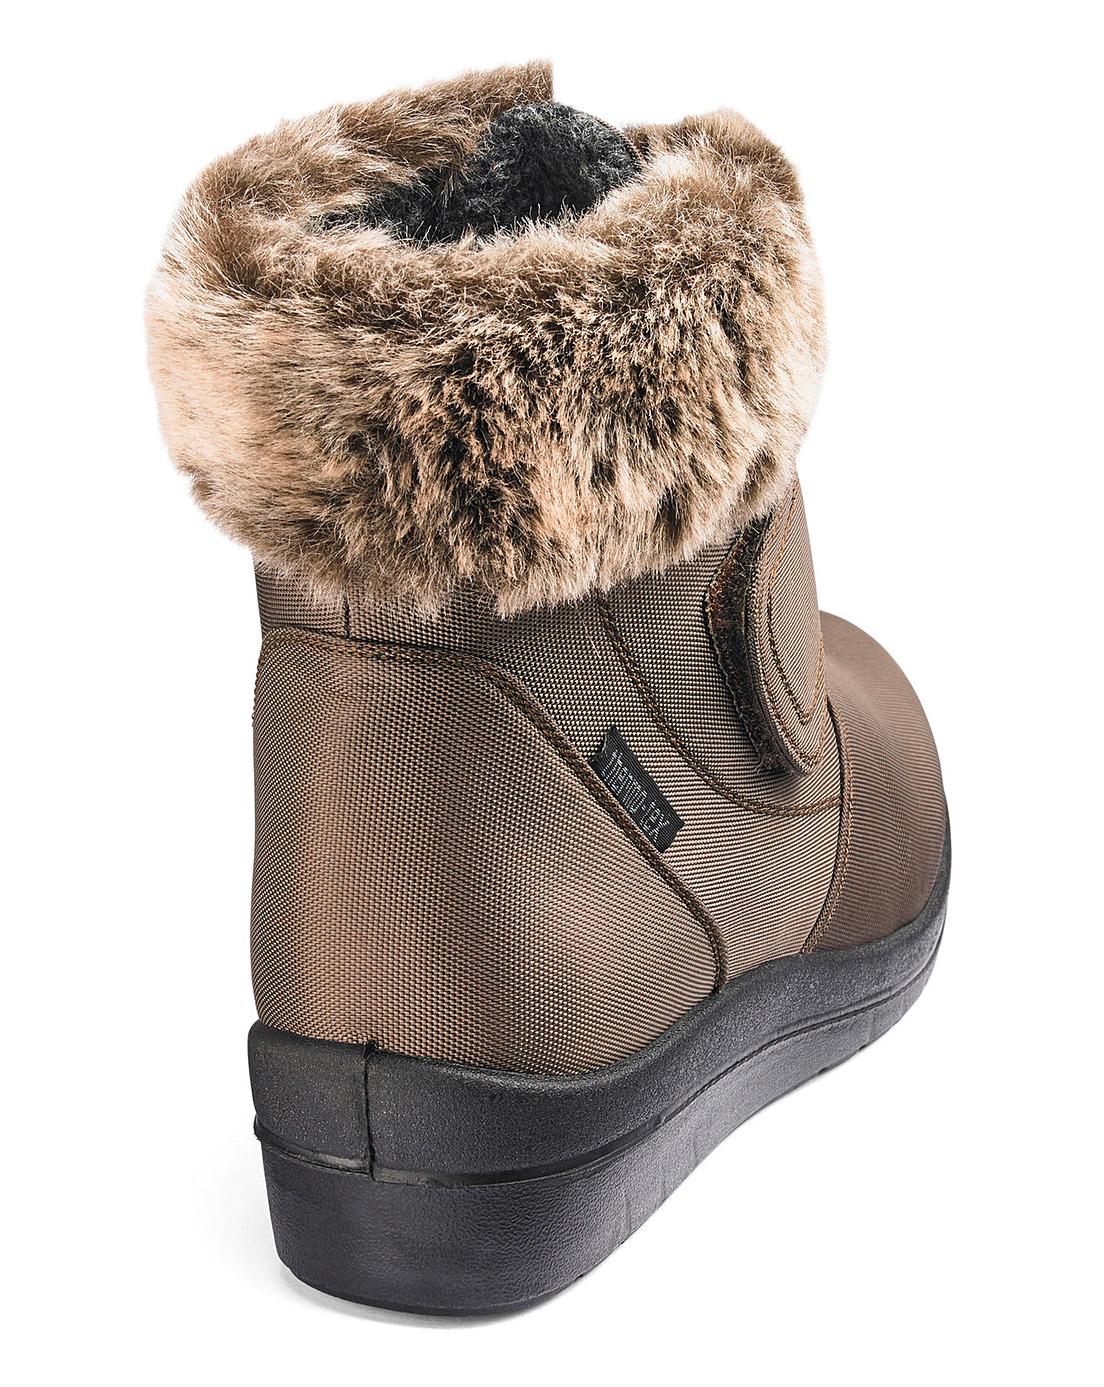 Cushion Walk Warm Lined Boots E Fit | Crazy Clearance